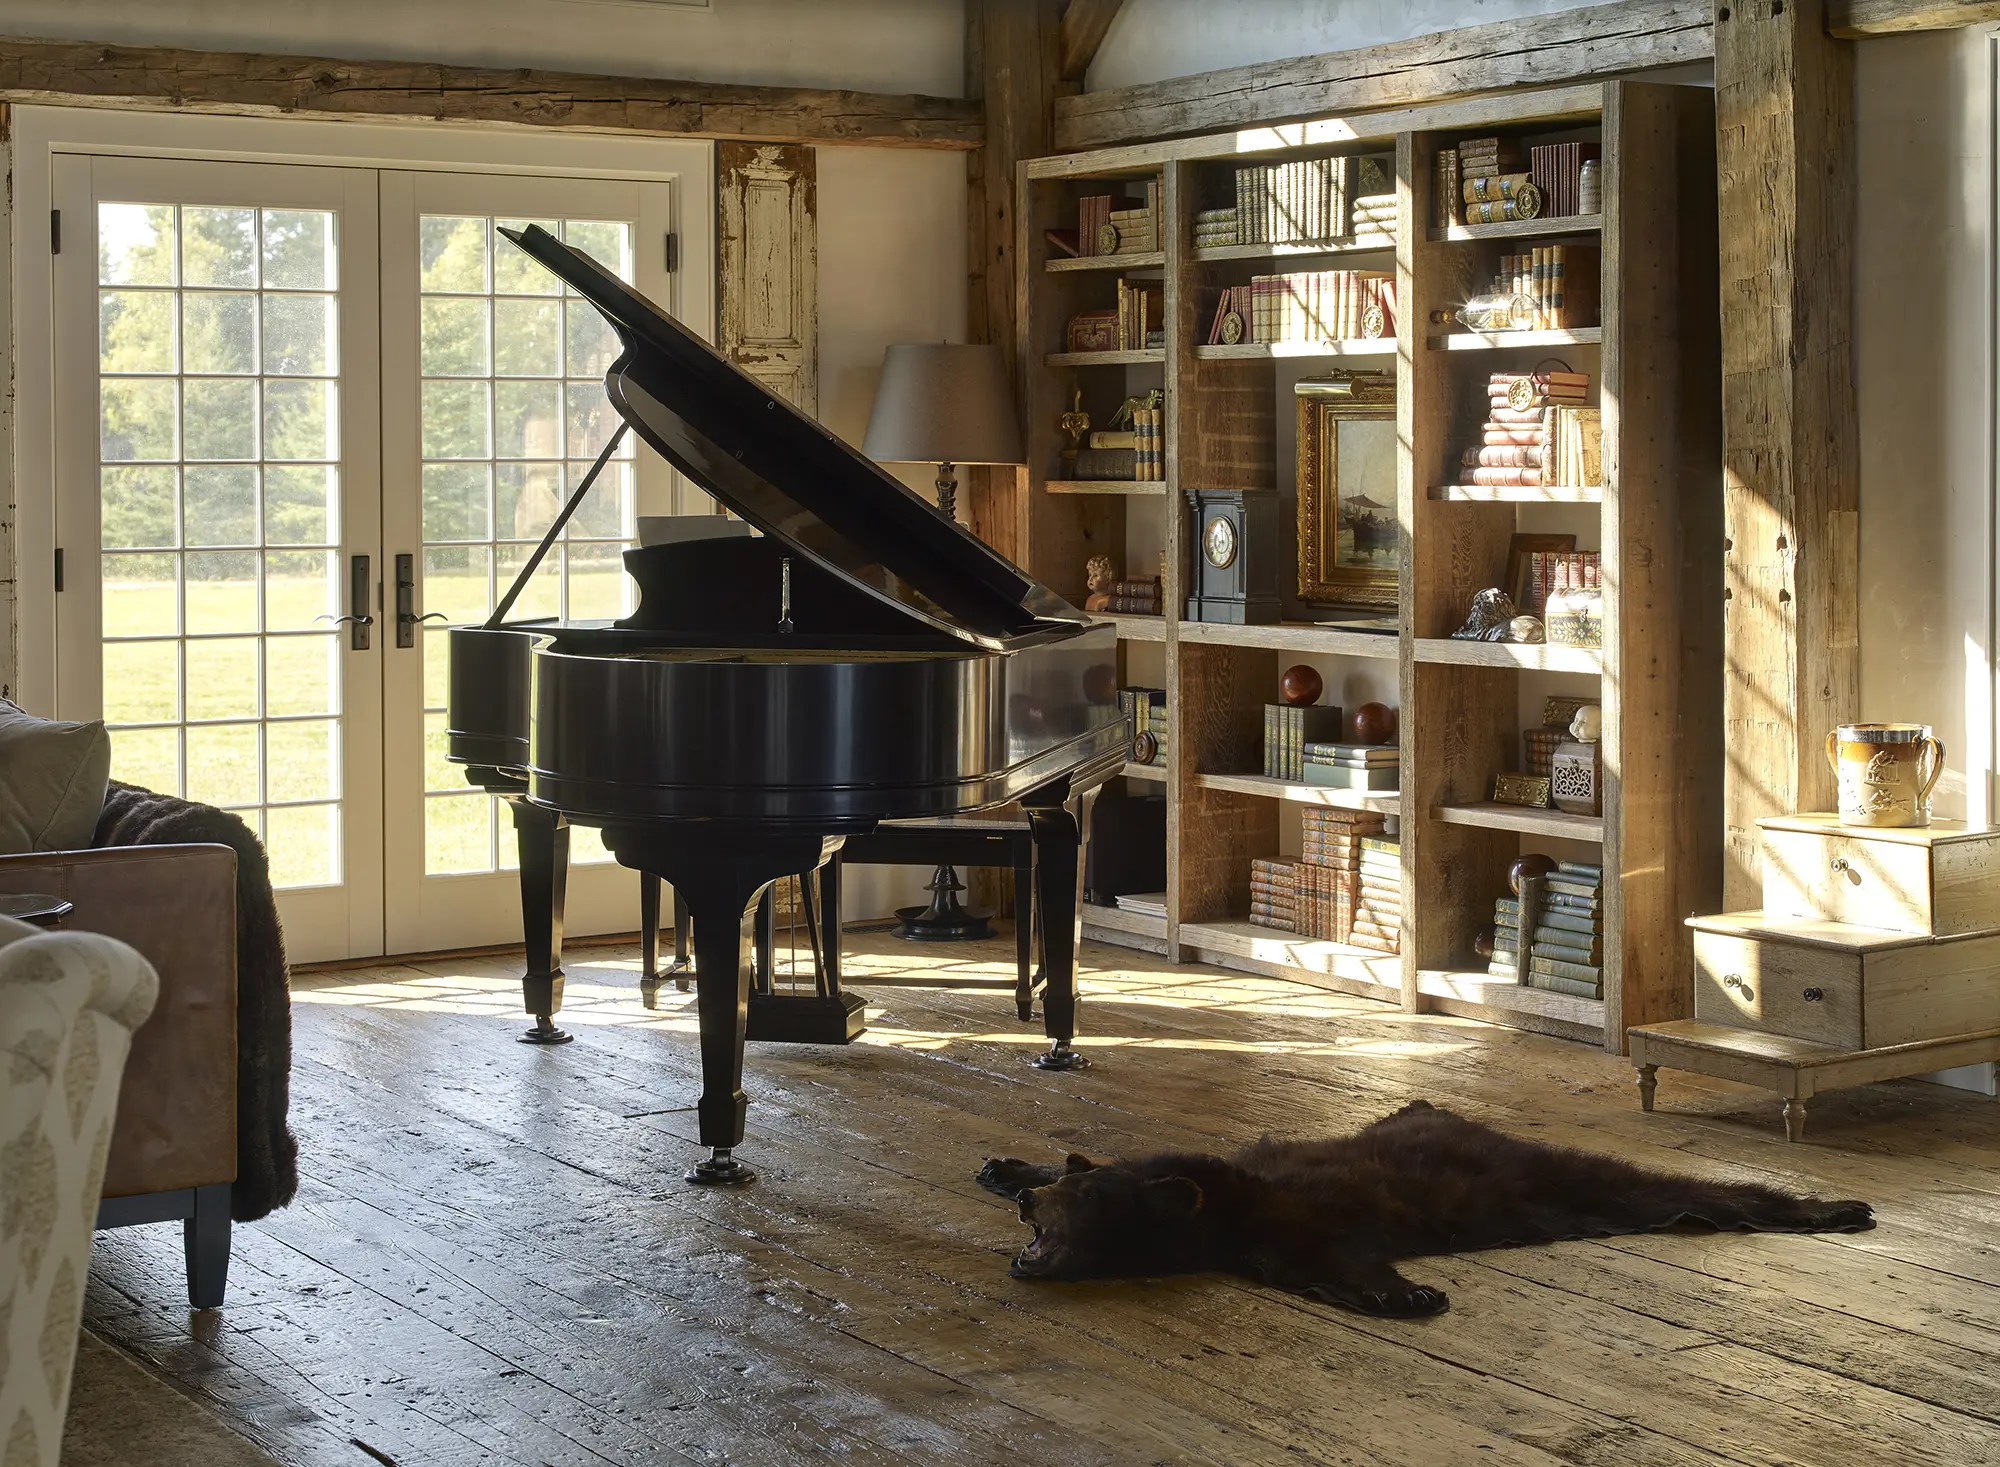 Large piano sits in a corner of this rustic living area